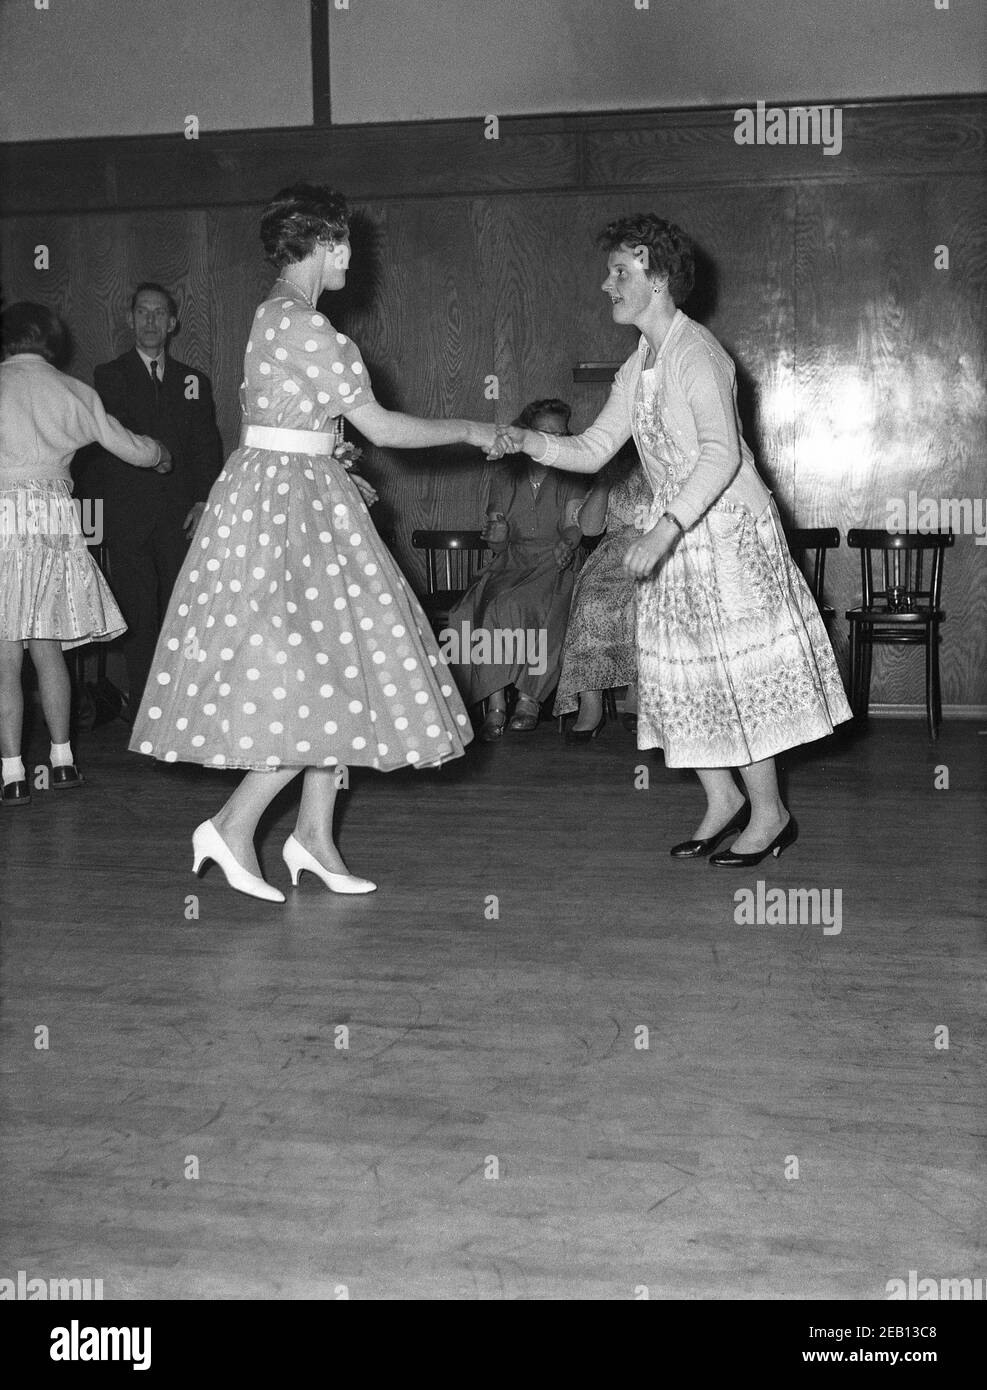 1950s, historical, 'doing the twist', at a birthday party, inside a large hotel room, two young women, one wearing a fashionable spotted or polka dot dress, having a dance together on a wooden floor, England, UK. In Britain it was still the era of swing, of the big band and swing movement but musically there were changes coming and the emerging skiffle sound and the rockabilly were just around the corner. Stock Photo